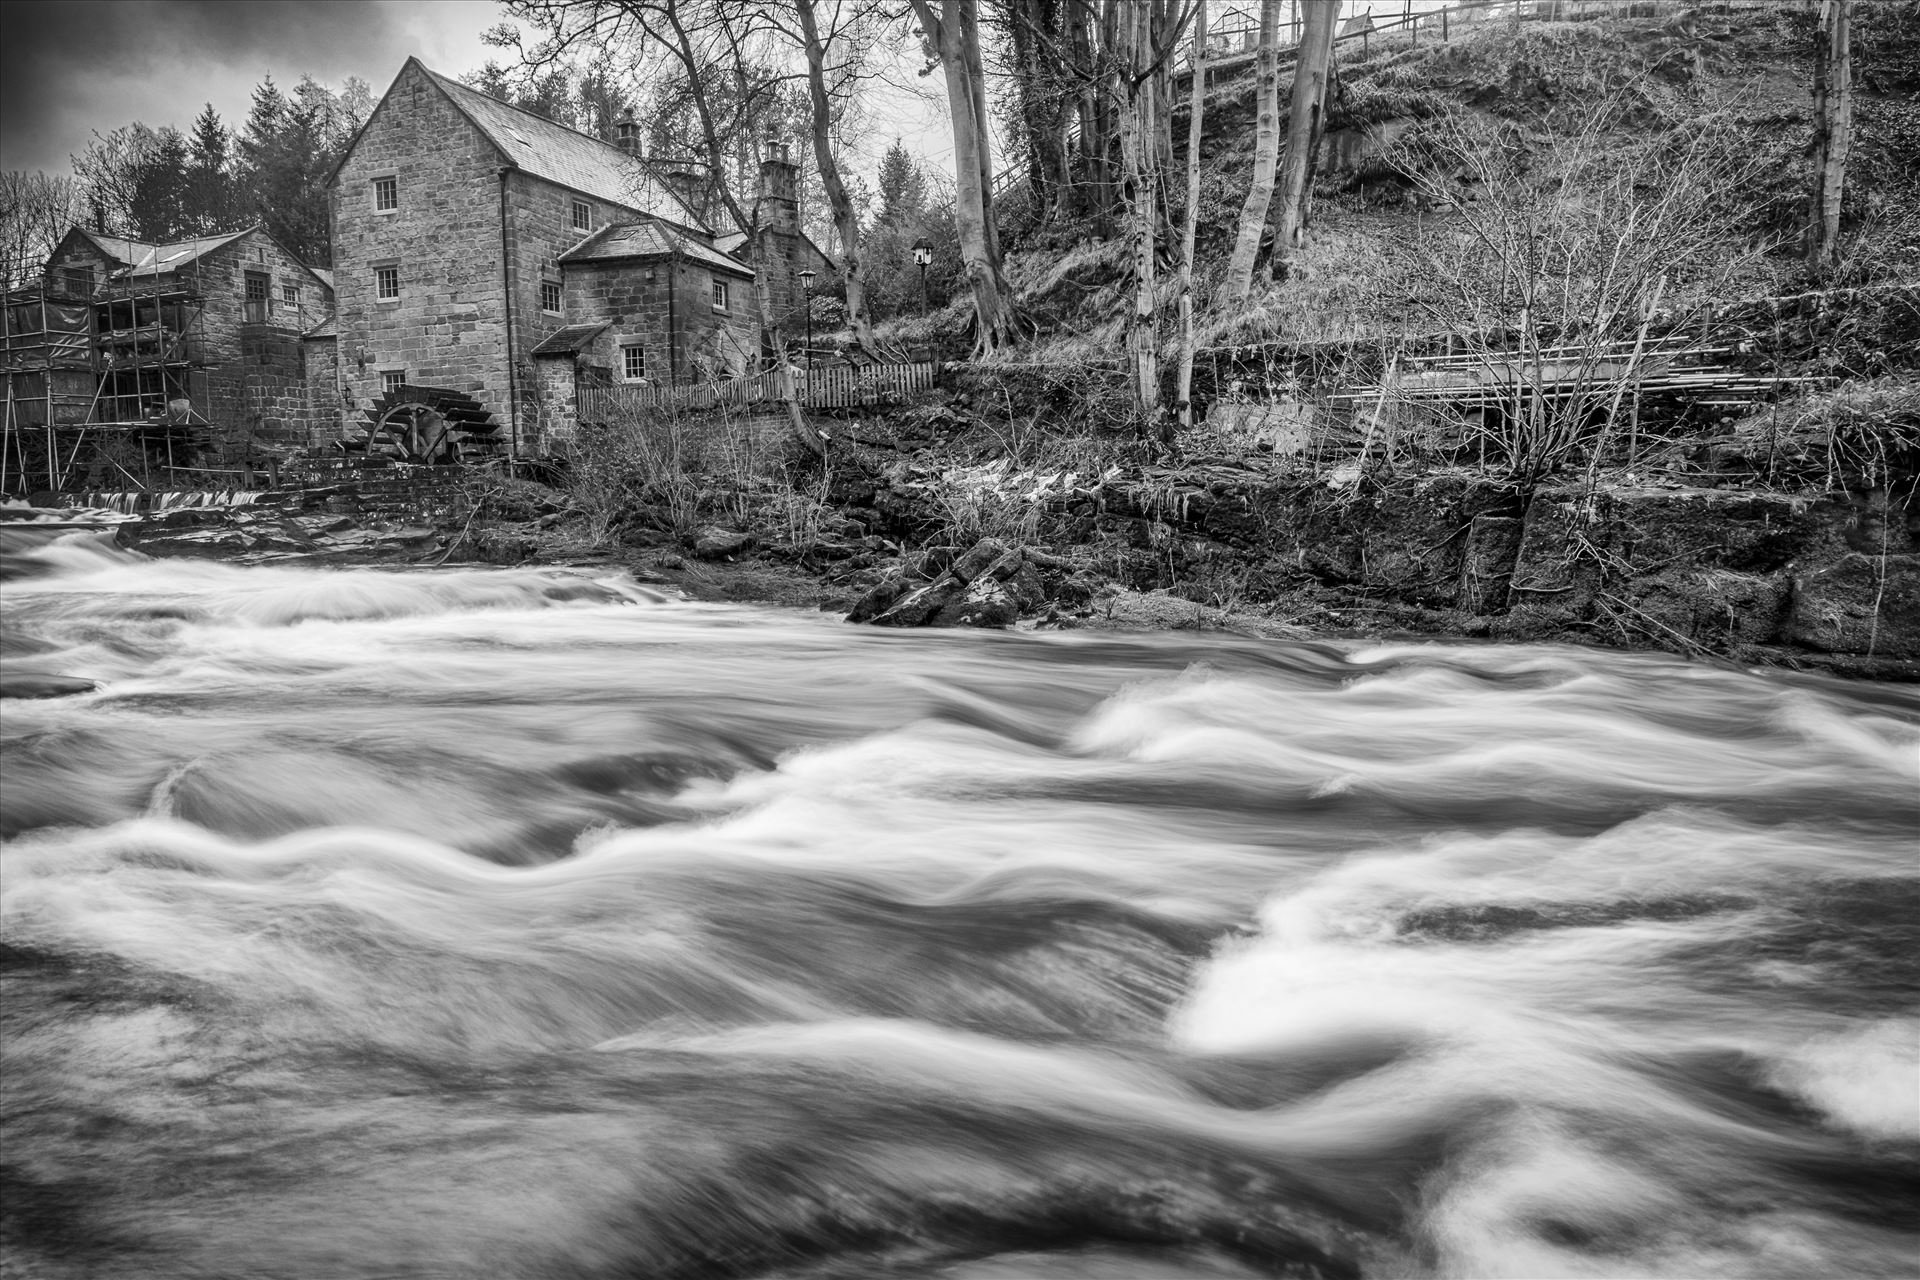 Thrum Mill, Rothbury - Thrum Mill is situated on the river Coquet just to the east of Rothbury. The building dates back to 1665, but has not worked as a mill for many years. The tiny hamlet of Thrum was originally the habitation of mill workers. by philreay